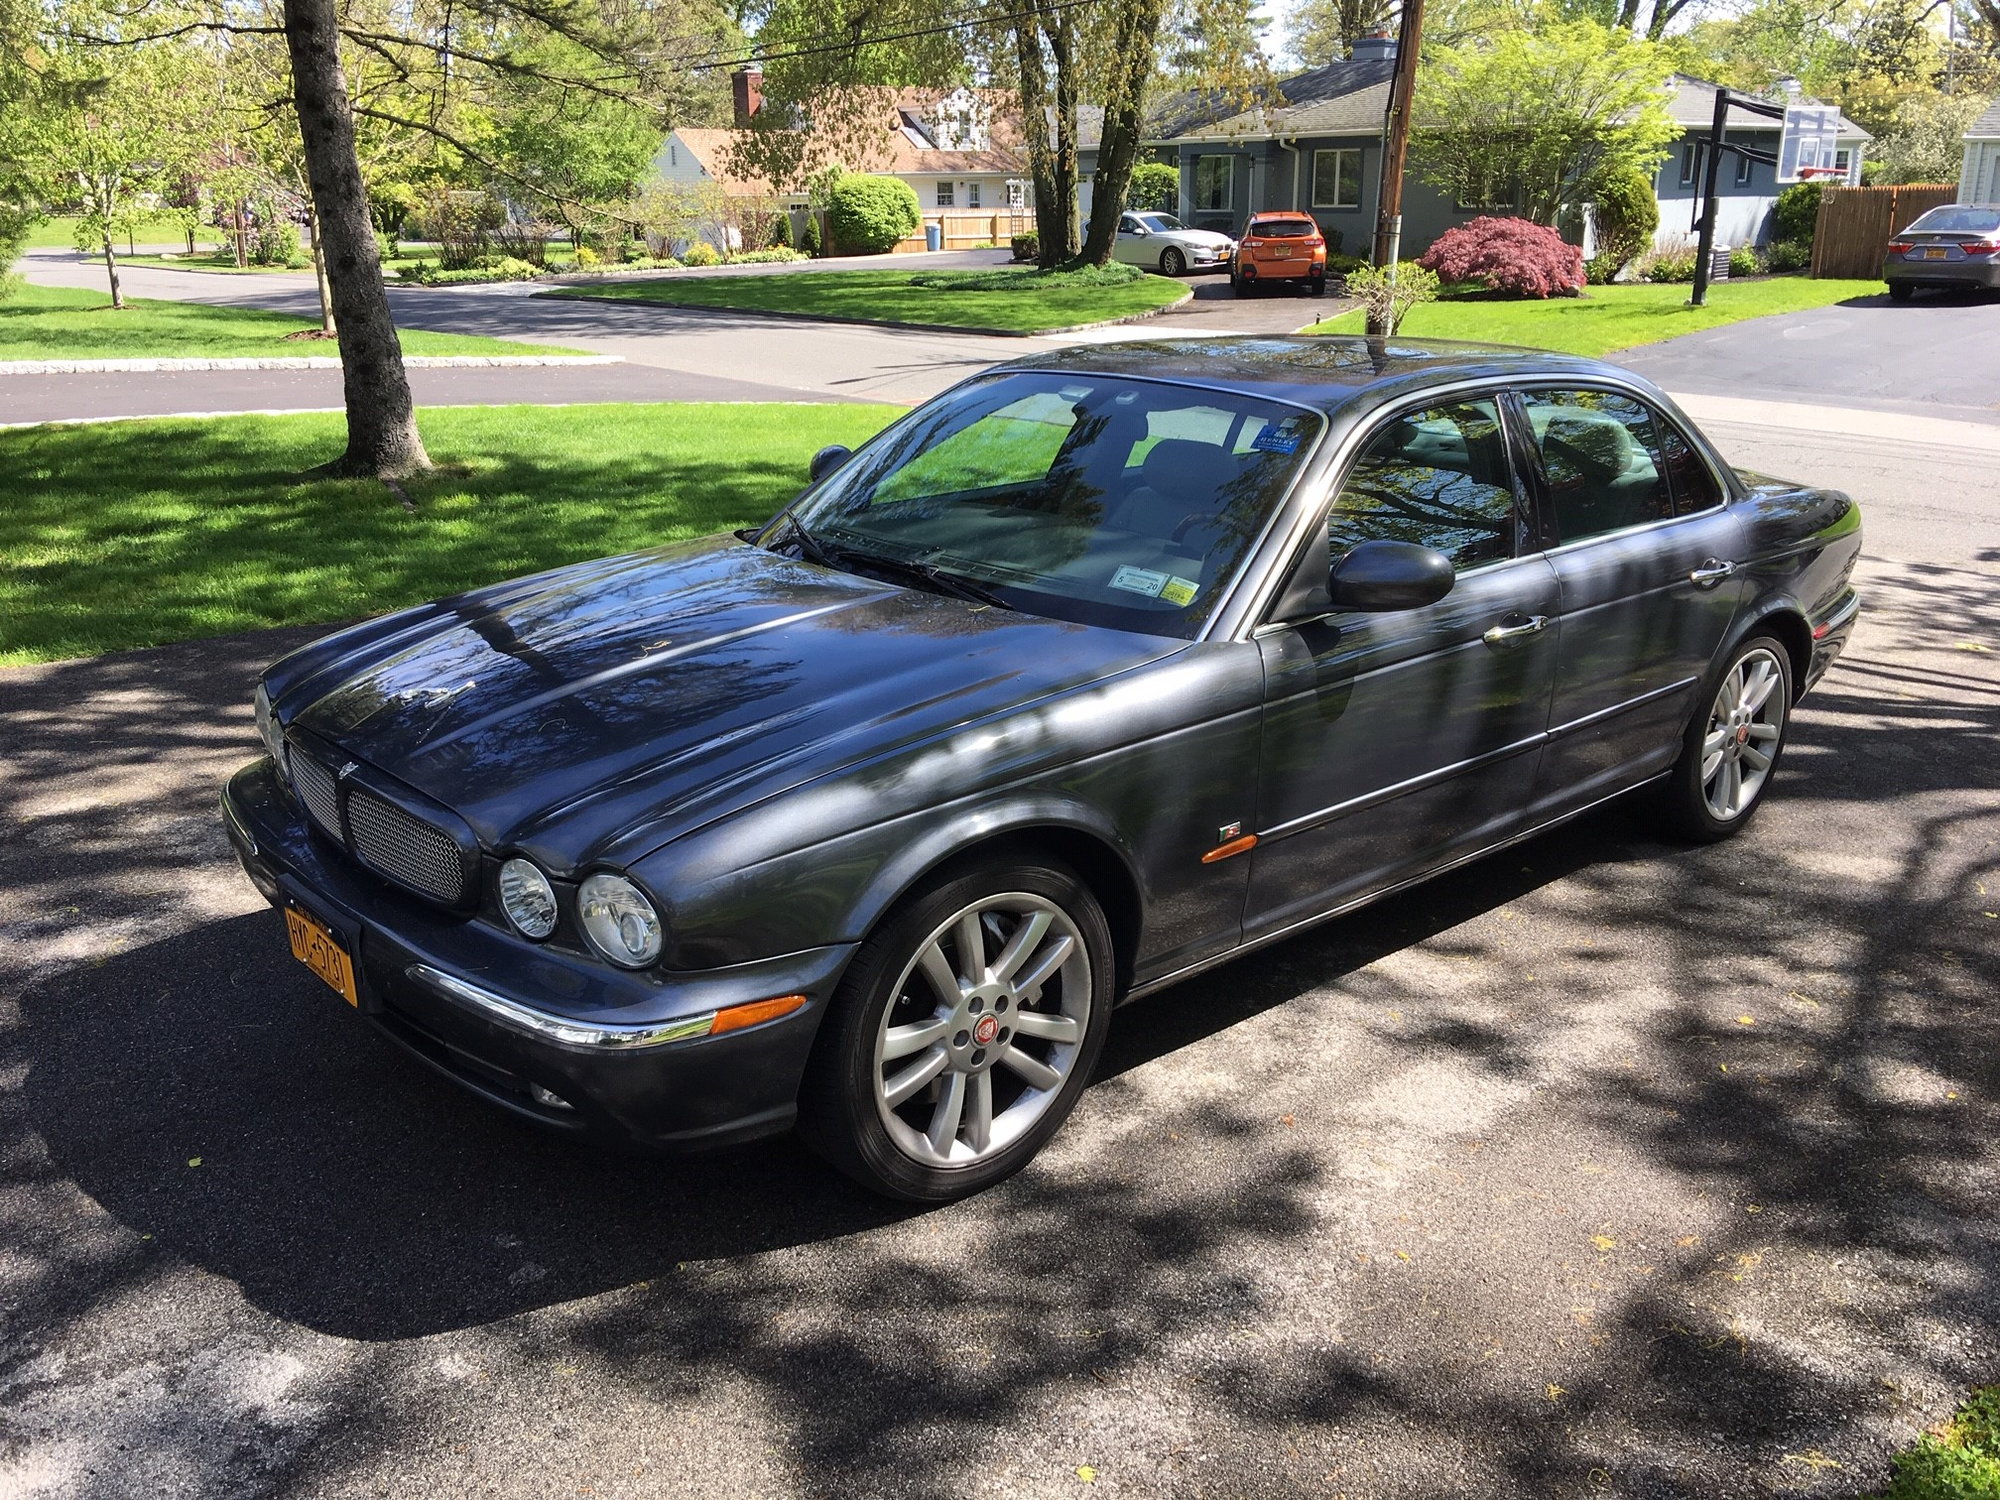 2004 Jaguar XJR - 2004 XJR for sale or trade - Used - VIN SAJEA73B34TG11481 - 124,000 Miles - 8 cyl - 2WD - Automatic - Sedan - Gray - Rye Brook, NY 10573, United States